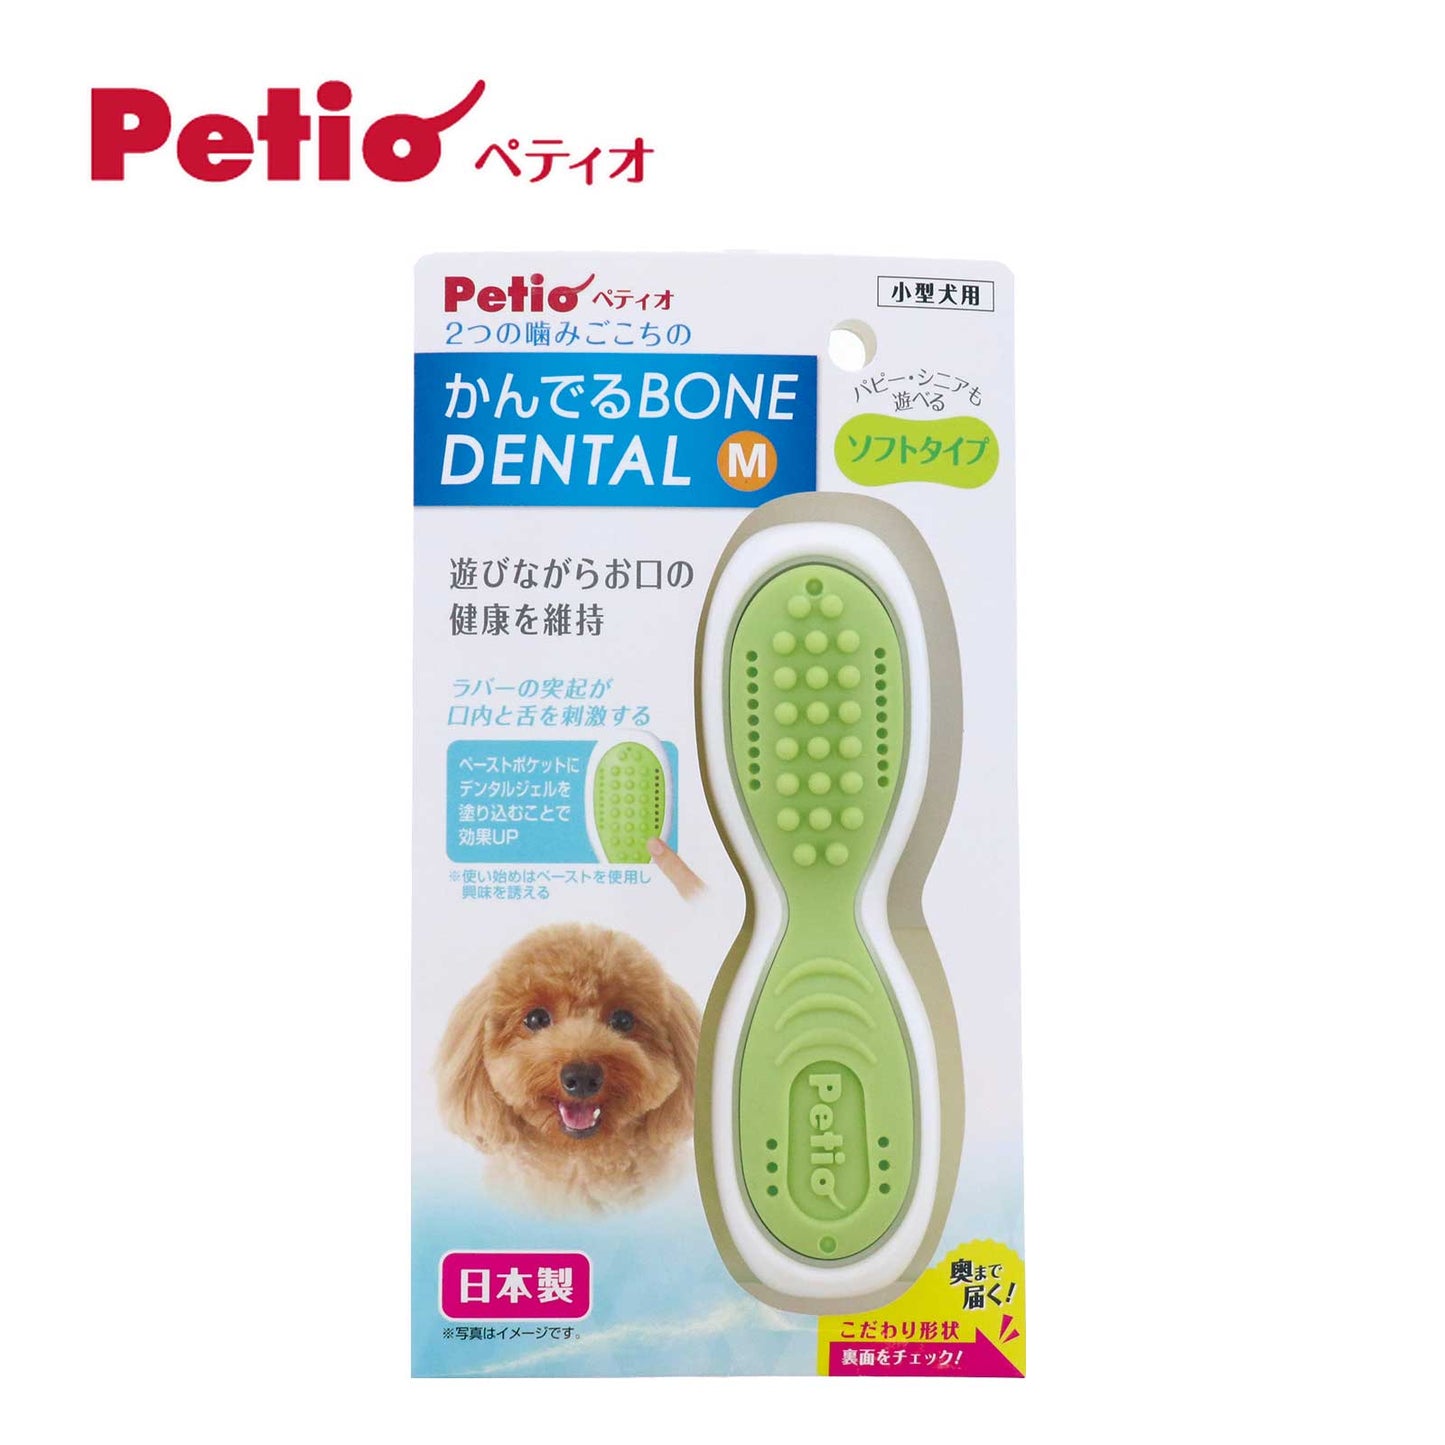 Petio Dental Chewing Rubber Bone Toy Soft